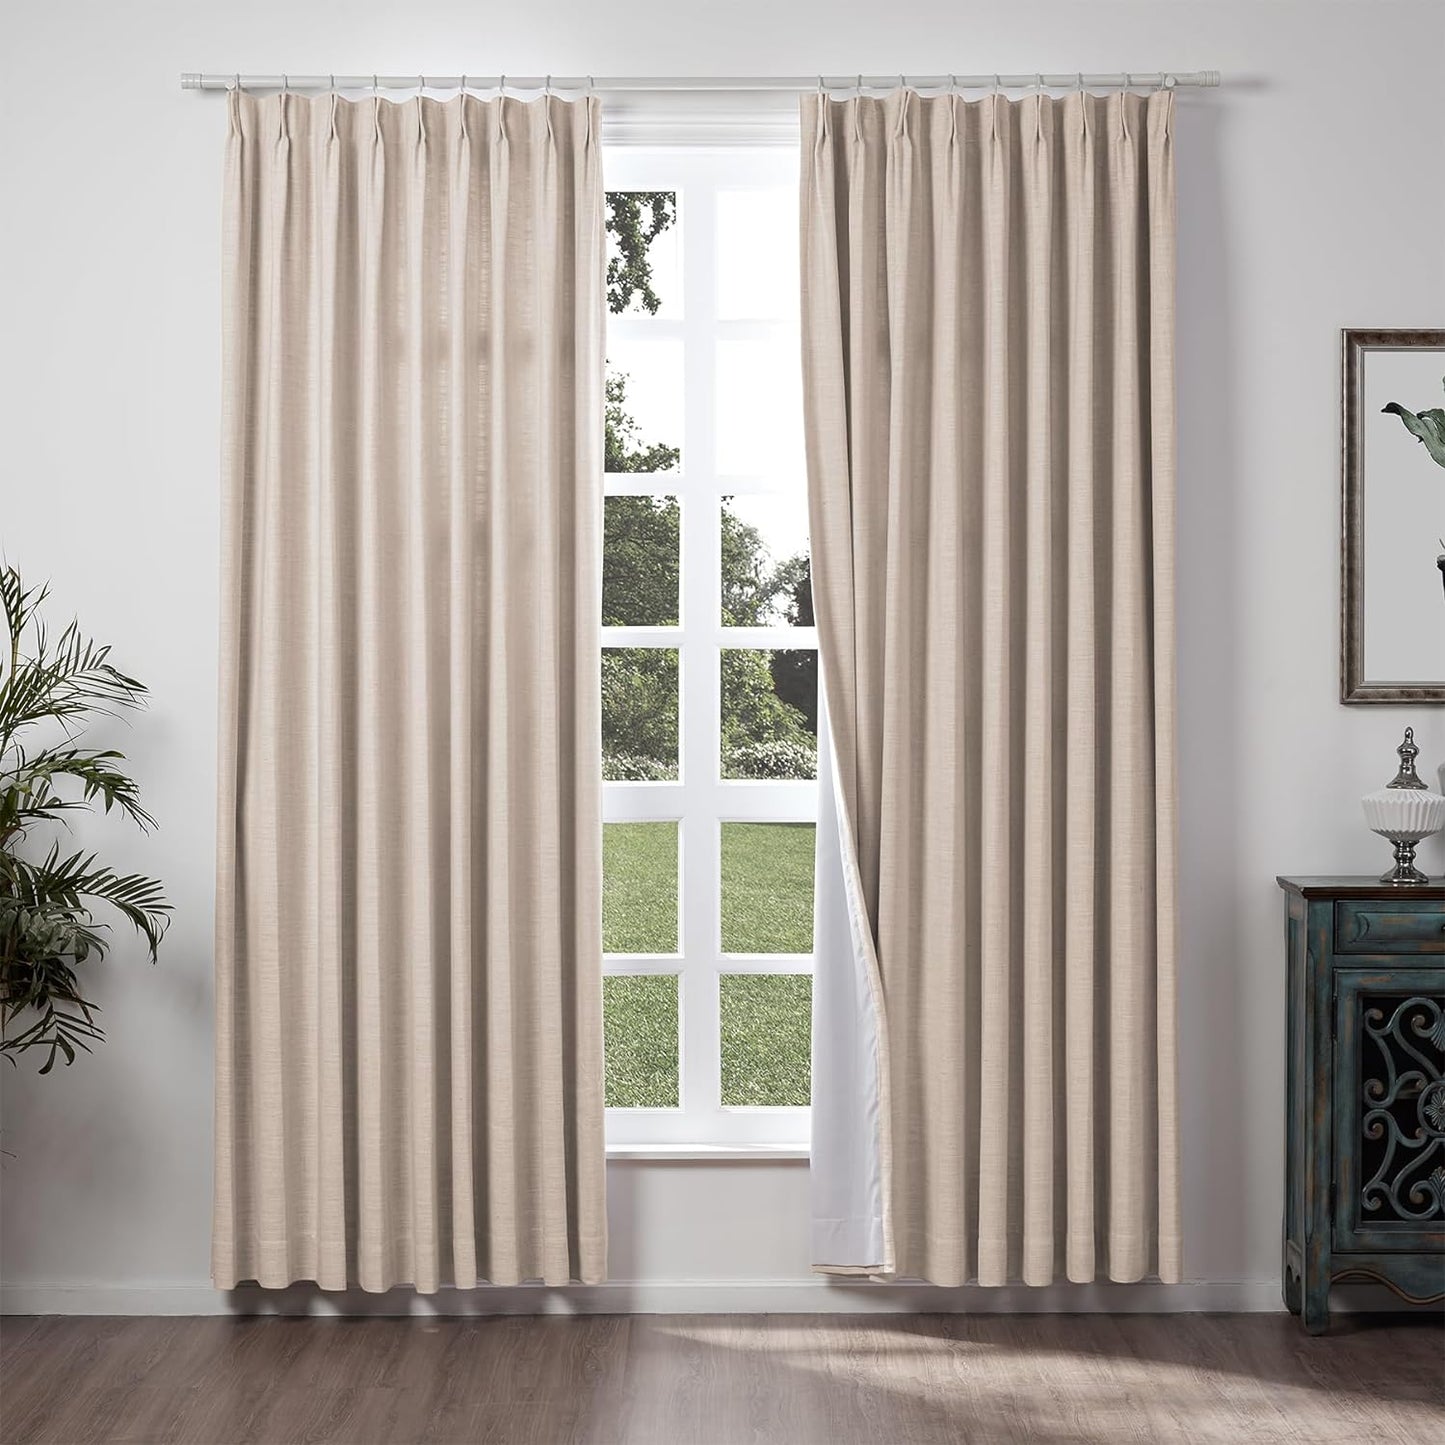 Chadmade 50" W X 63" L Polyester Linen Drape with Blackout Lining Pinch Pleat Curtain for Sliding Door Patio Door Living Room Bedroom, (1 Panel) Sand Beige Tallis Collection  ChadMade Tapioca (7) 120Wx96L 